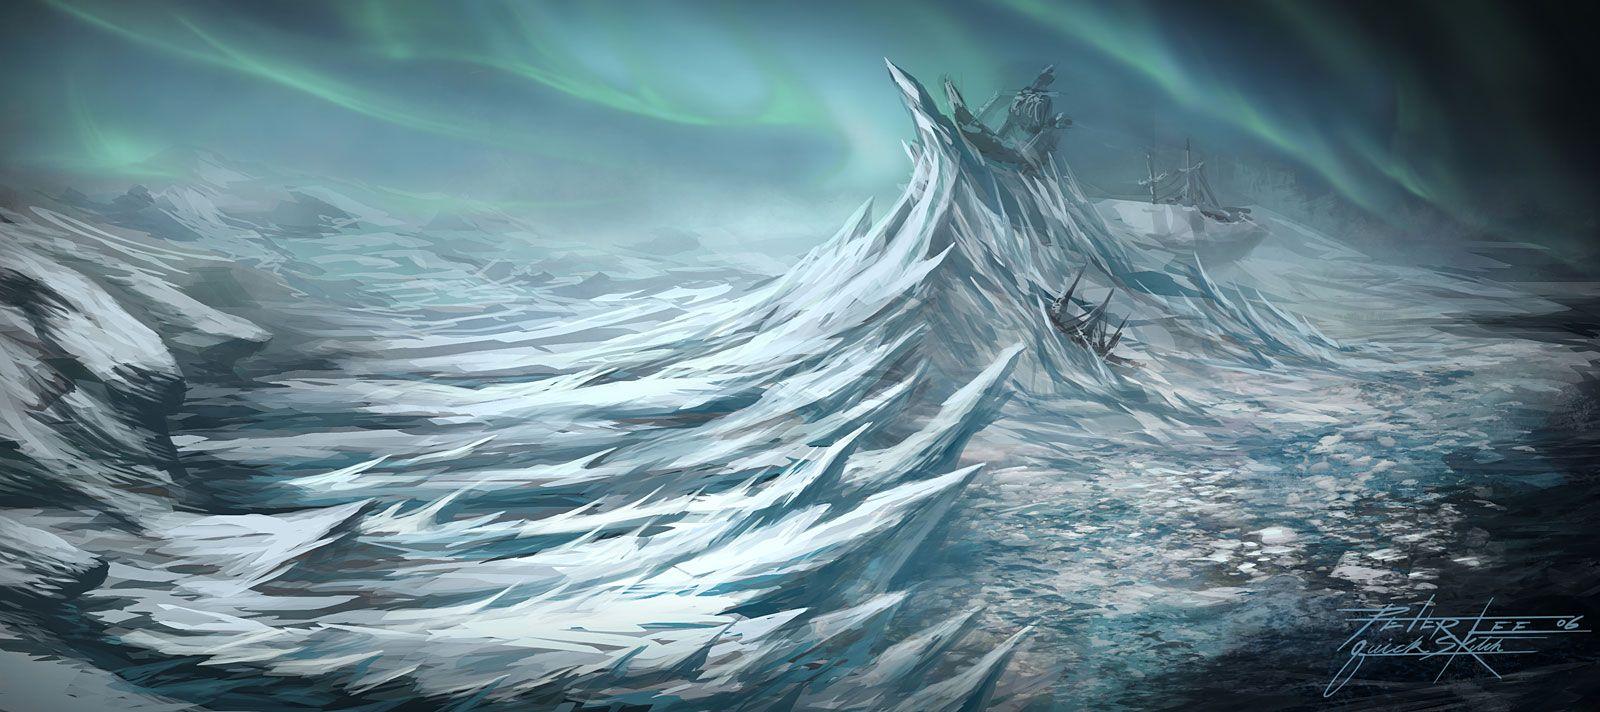 Wrath of the Lich King Wallpaper & Concepts Photo News